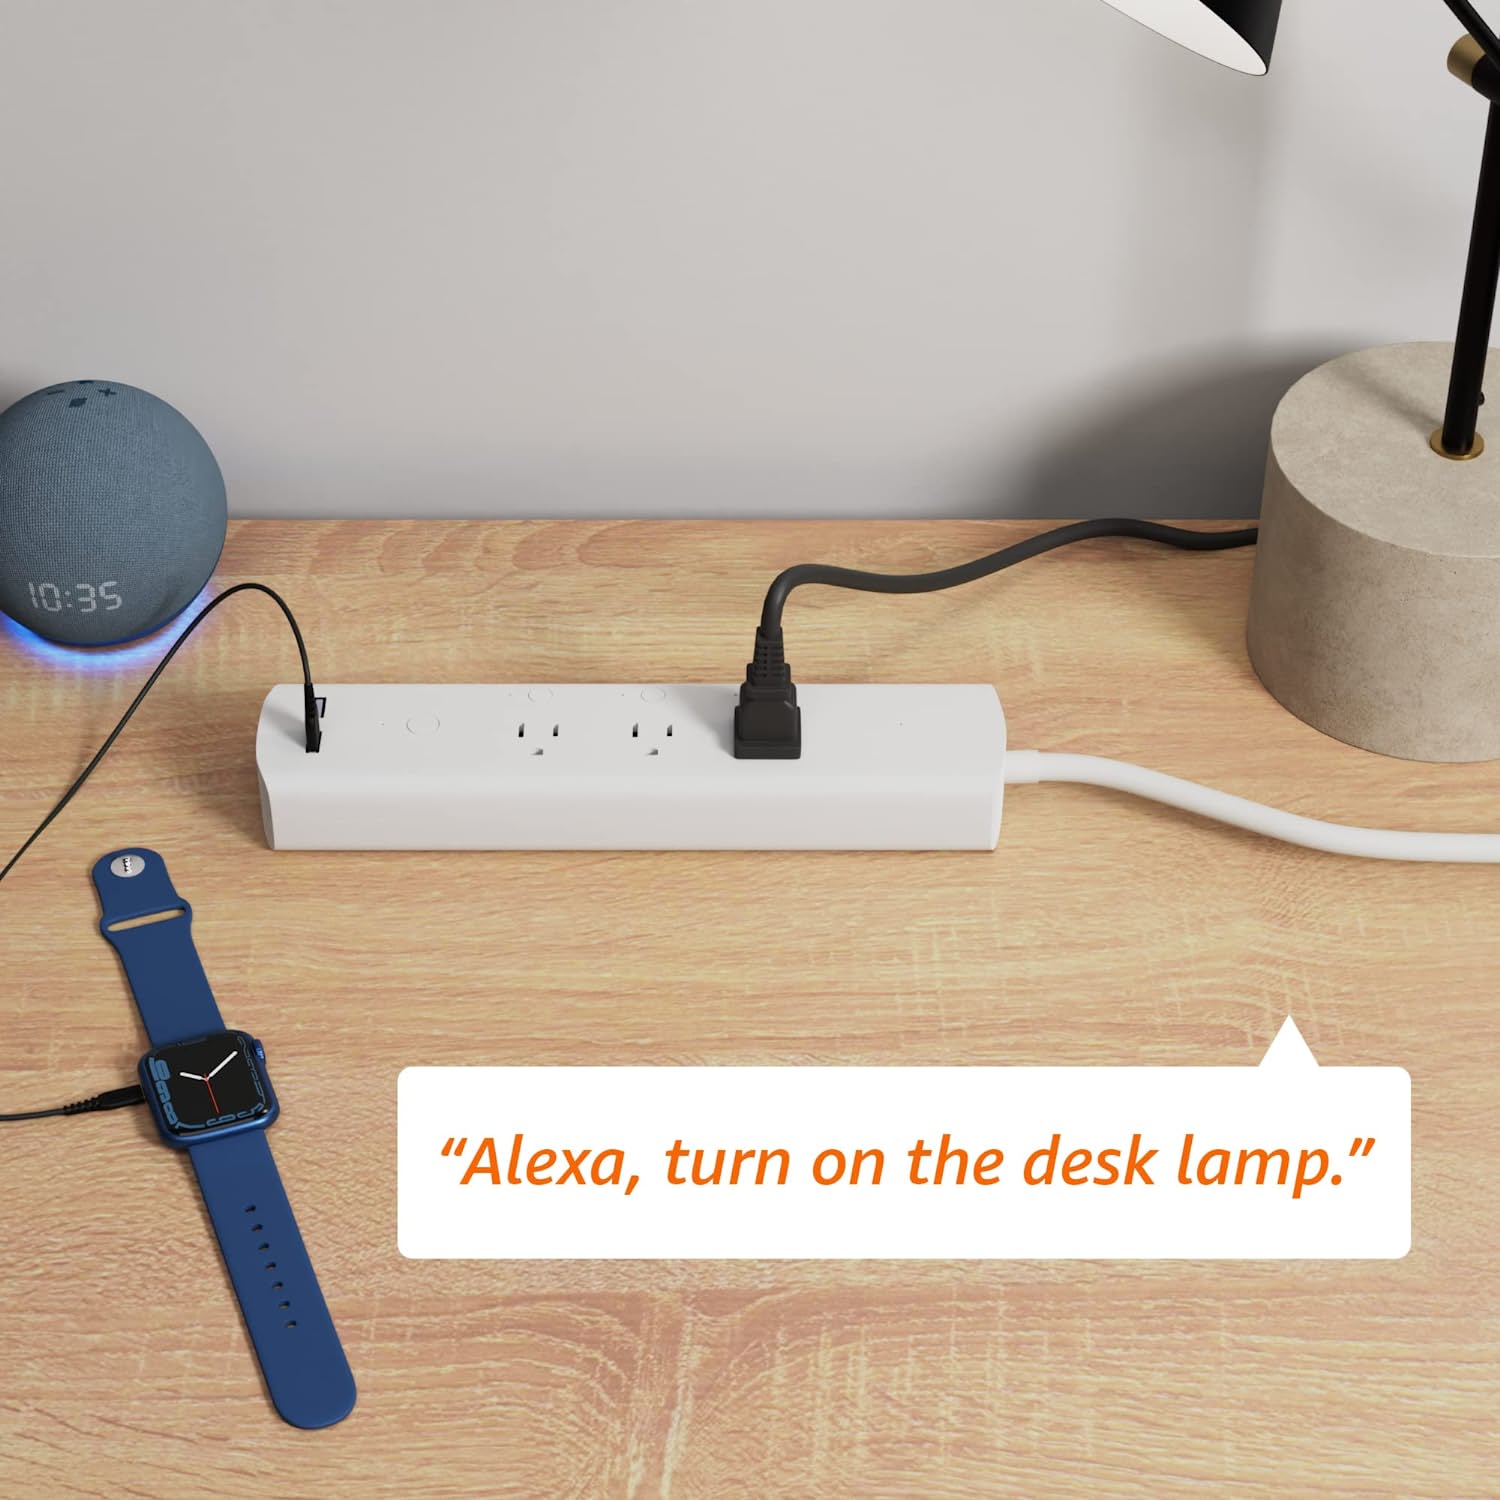 https://www.digitaltrends.com/wp-content/uploads/2022/10/Amazon-Basics-Smart-Plug-Power-Strip-on-tabletop-charging-with-watch-echo-and-lamp.jpg?fit=720%2C720&p=1